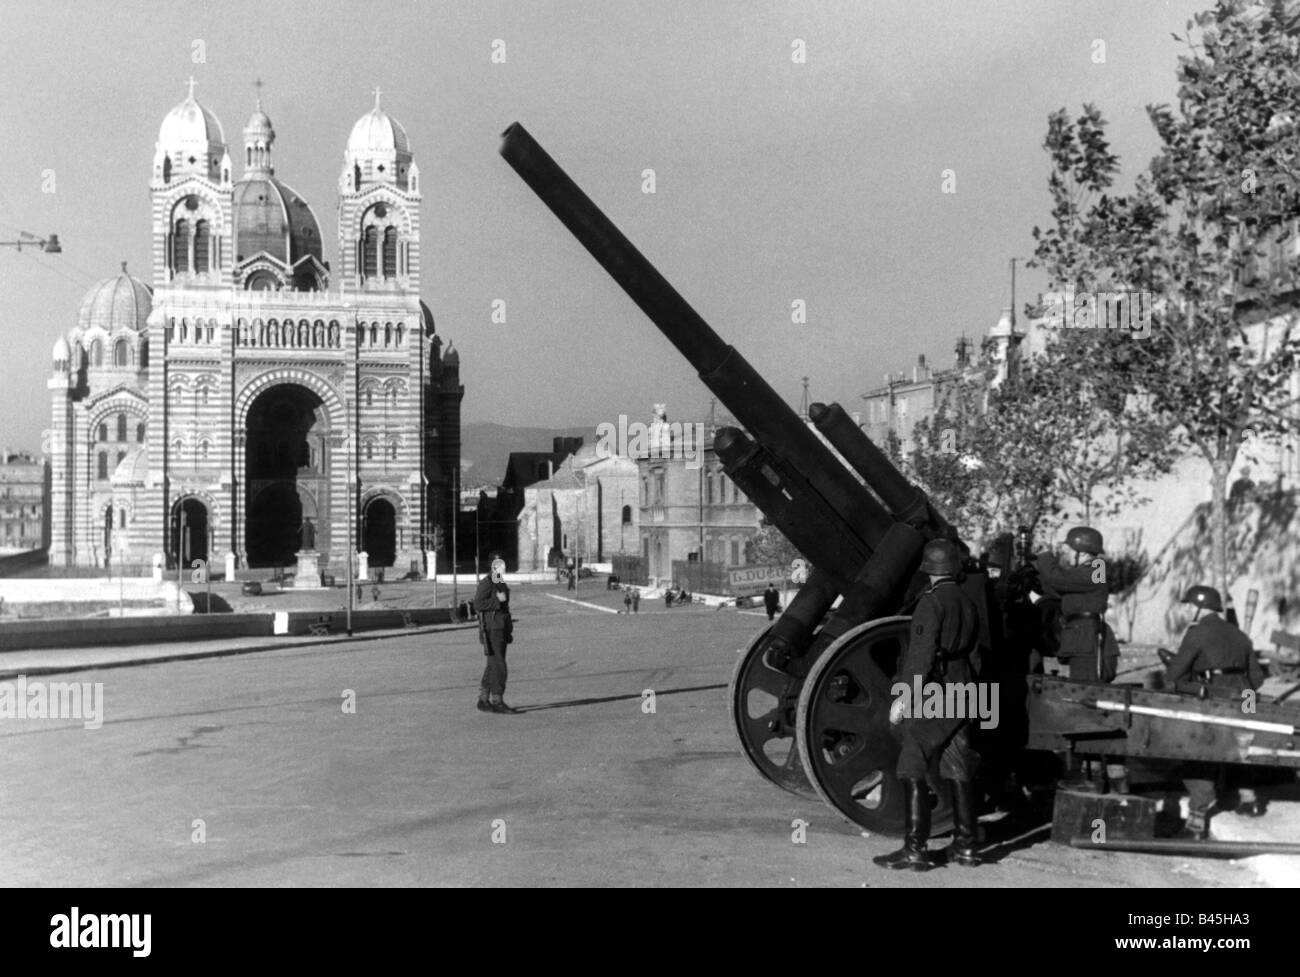 events, Second World War / WWII, France, German occupation, occupation of Vichy France, November 1942, German heavy gun at the Place de la Major, Marseille, 20.11.1942, in the background the cathedral, Stock Photo